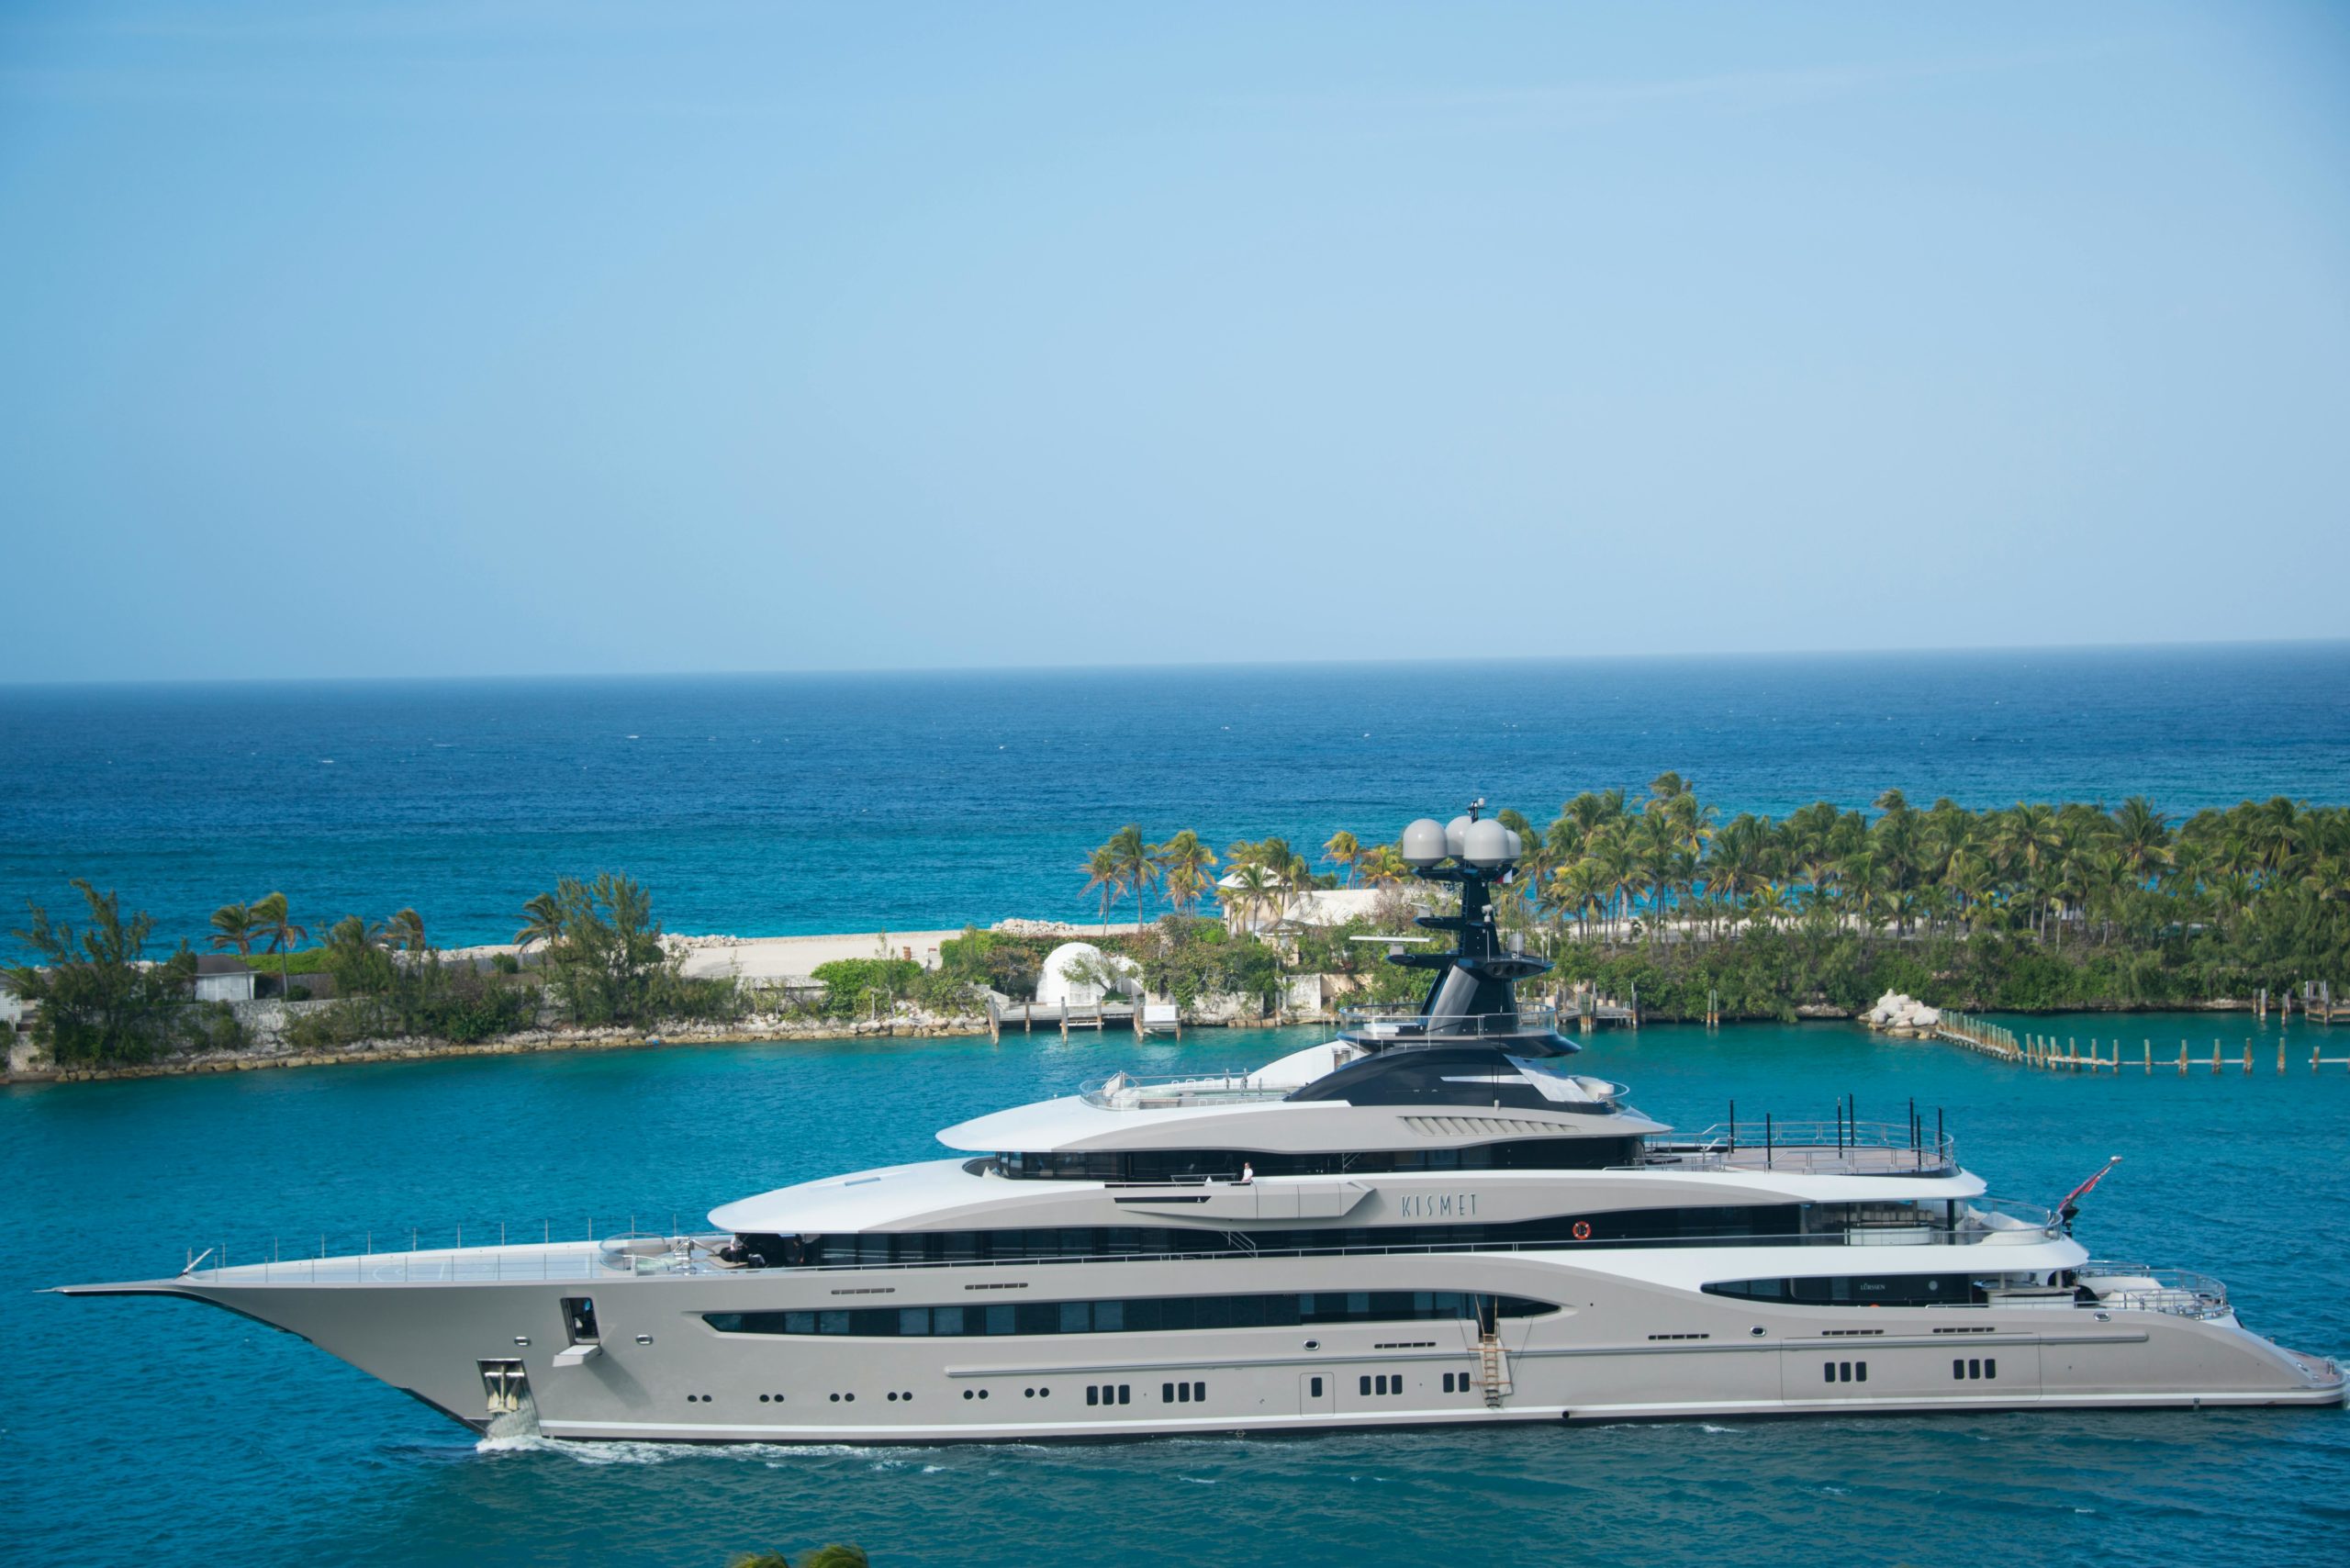 Top 3 Biggest Luxury Yachts in the World